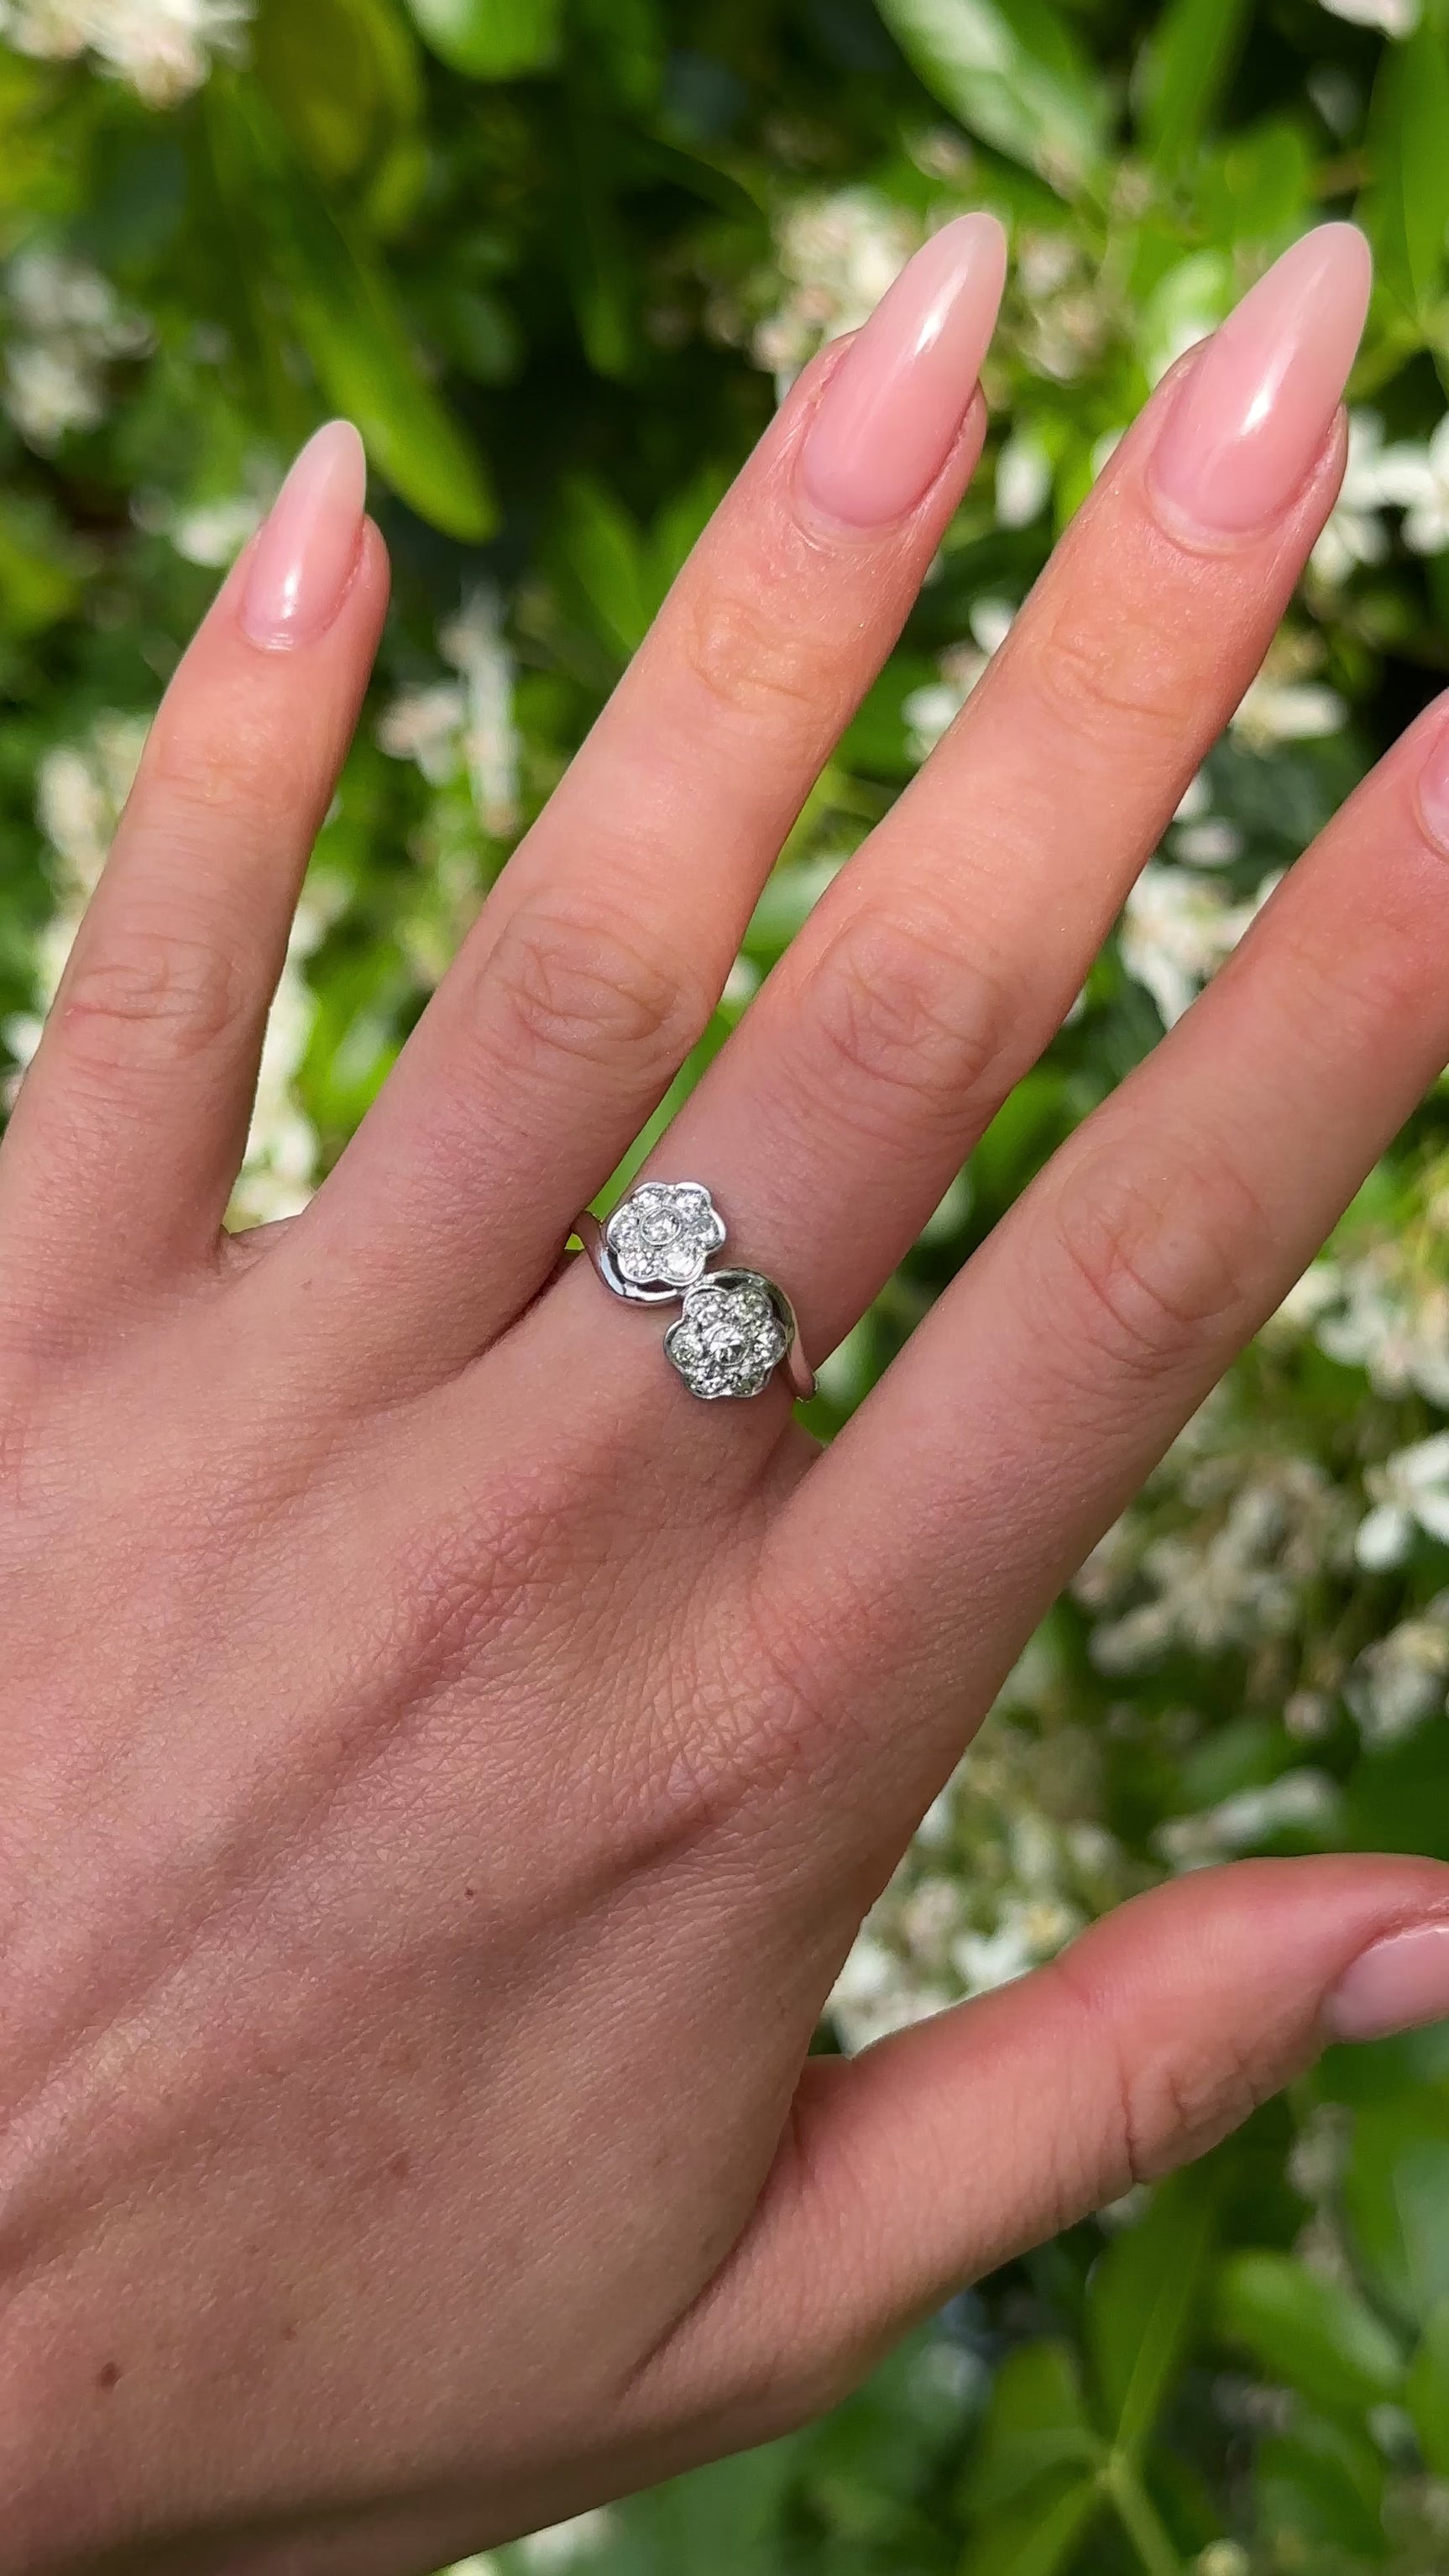 Vintage, 1940s Diamond Cluster Engagement Ring, 18ct White Gold and Platinum worn on hand.